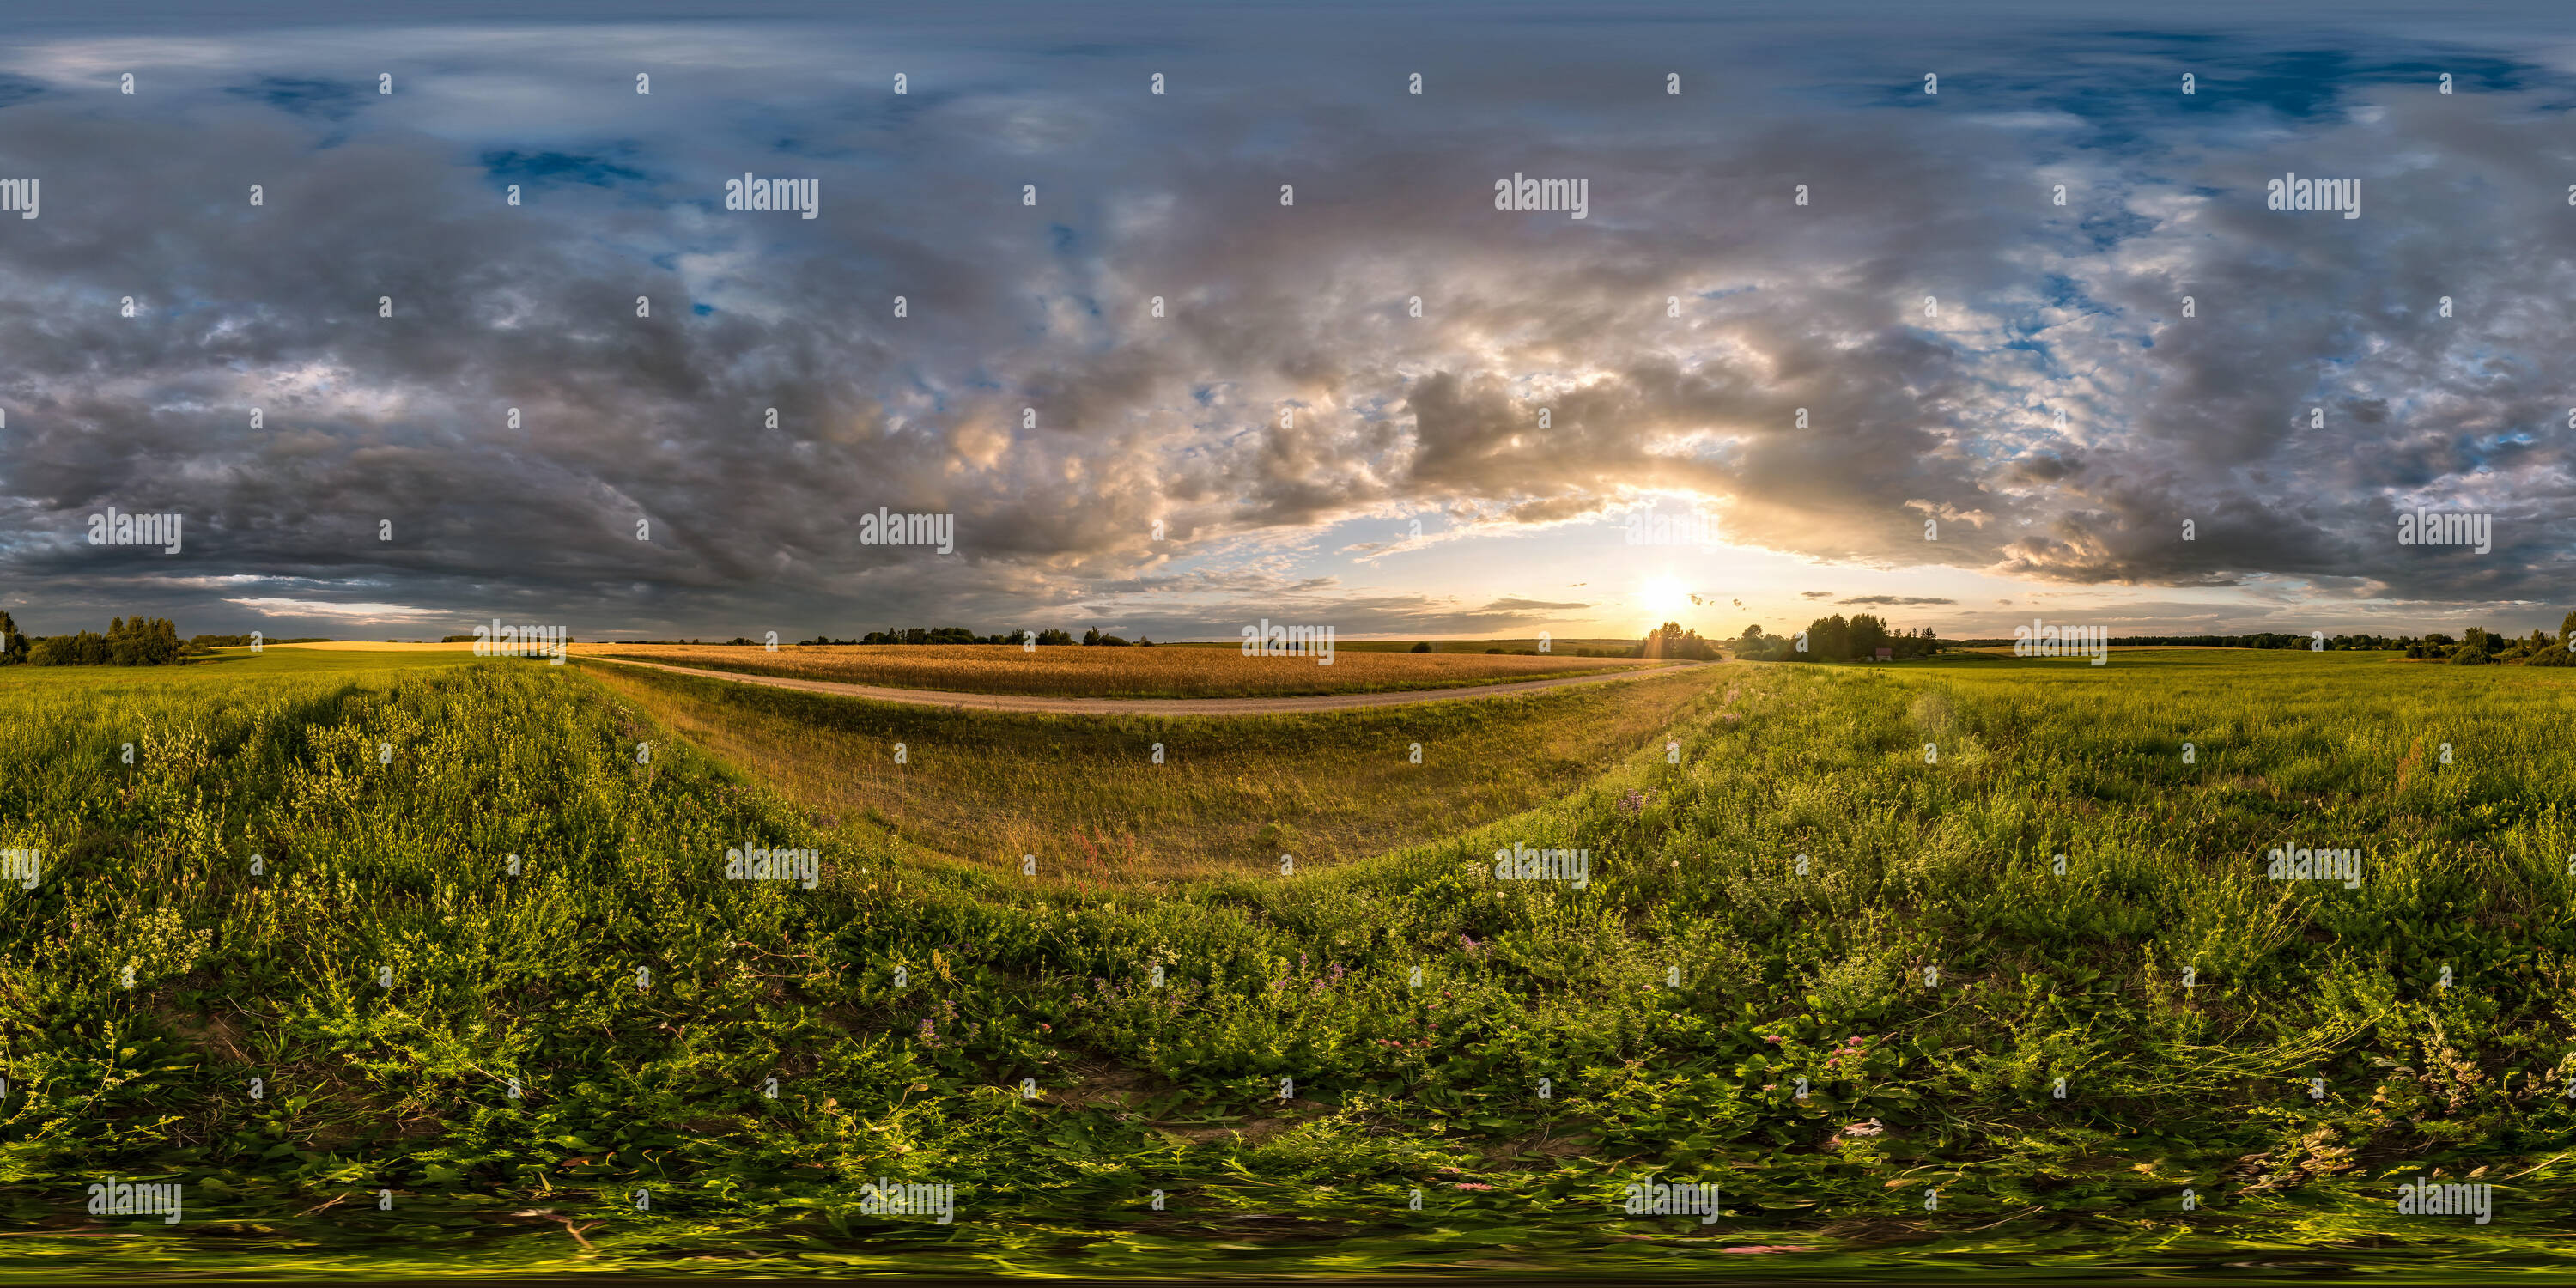 360° view of full seamless spherical hdri panorama 360 degrees angle view  among fields in summer evening sunset with awesome in equirectangular  projection with zen - Alamy